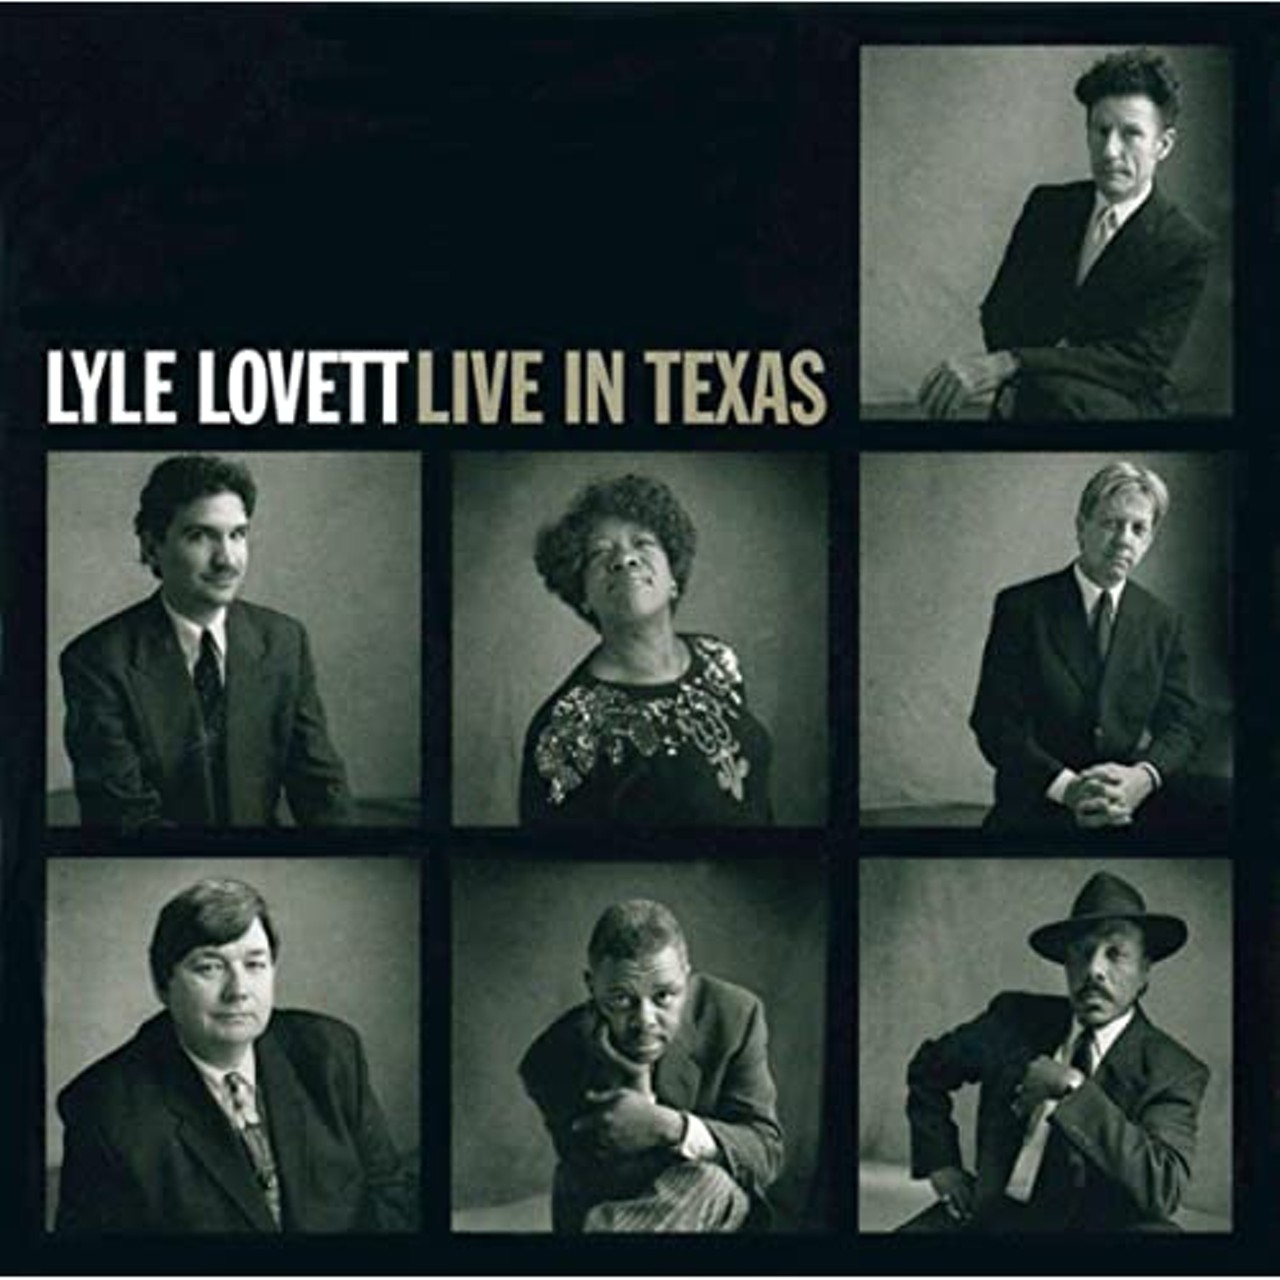 Lyle Lovett: "Live in Texas"
Texas singer-songwriter Lyle Lovett drew critical raves for this 2006 live album recorded in San Antonio and Austin that showcases an energetic set by his Large Band and a strong sampling of his best-loved tunes.
Photo via Curb / MCA